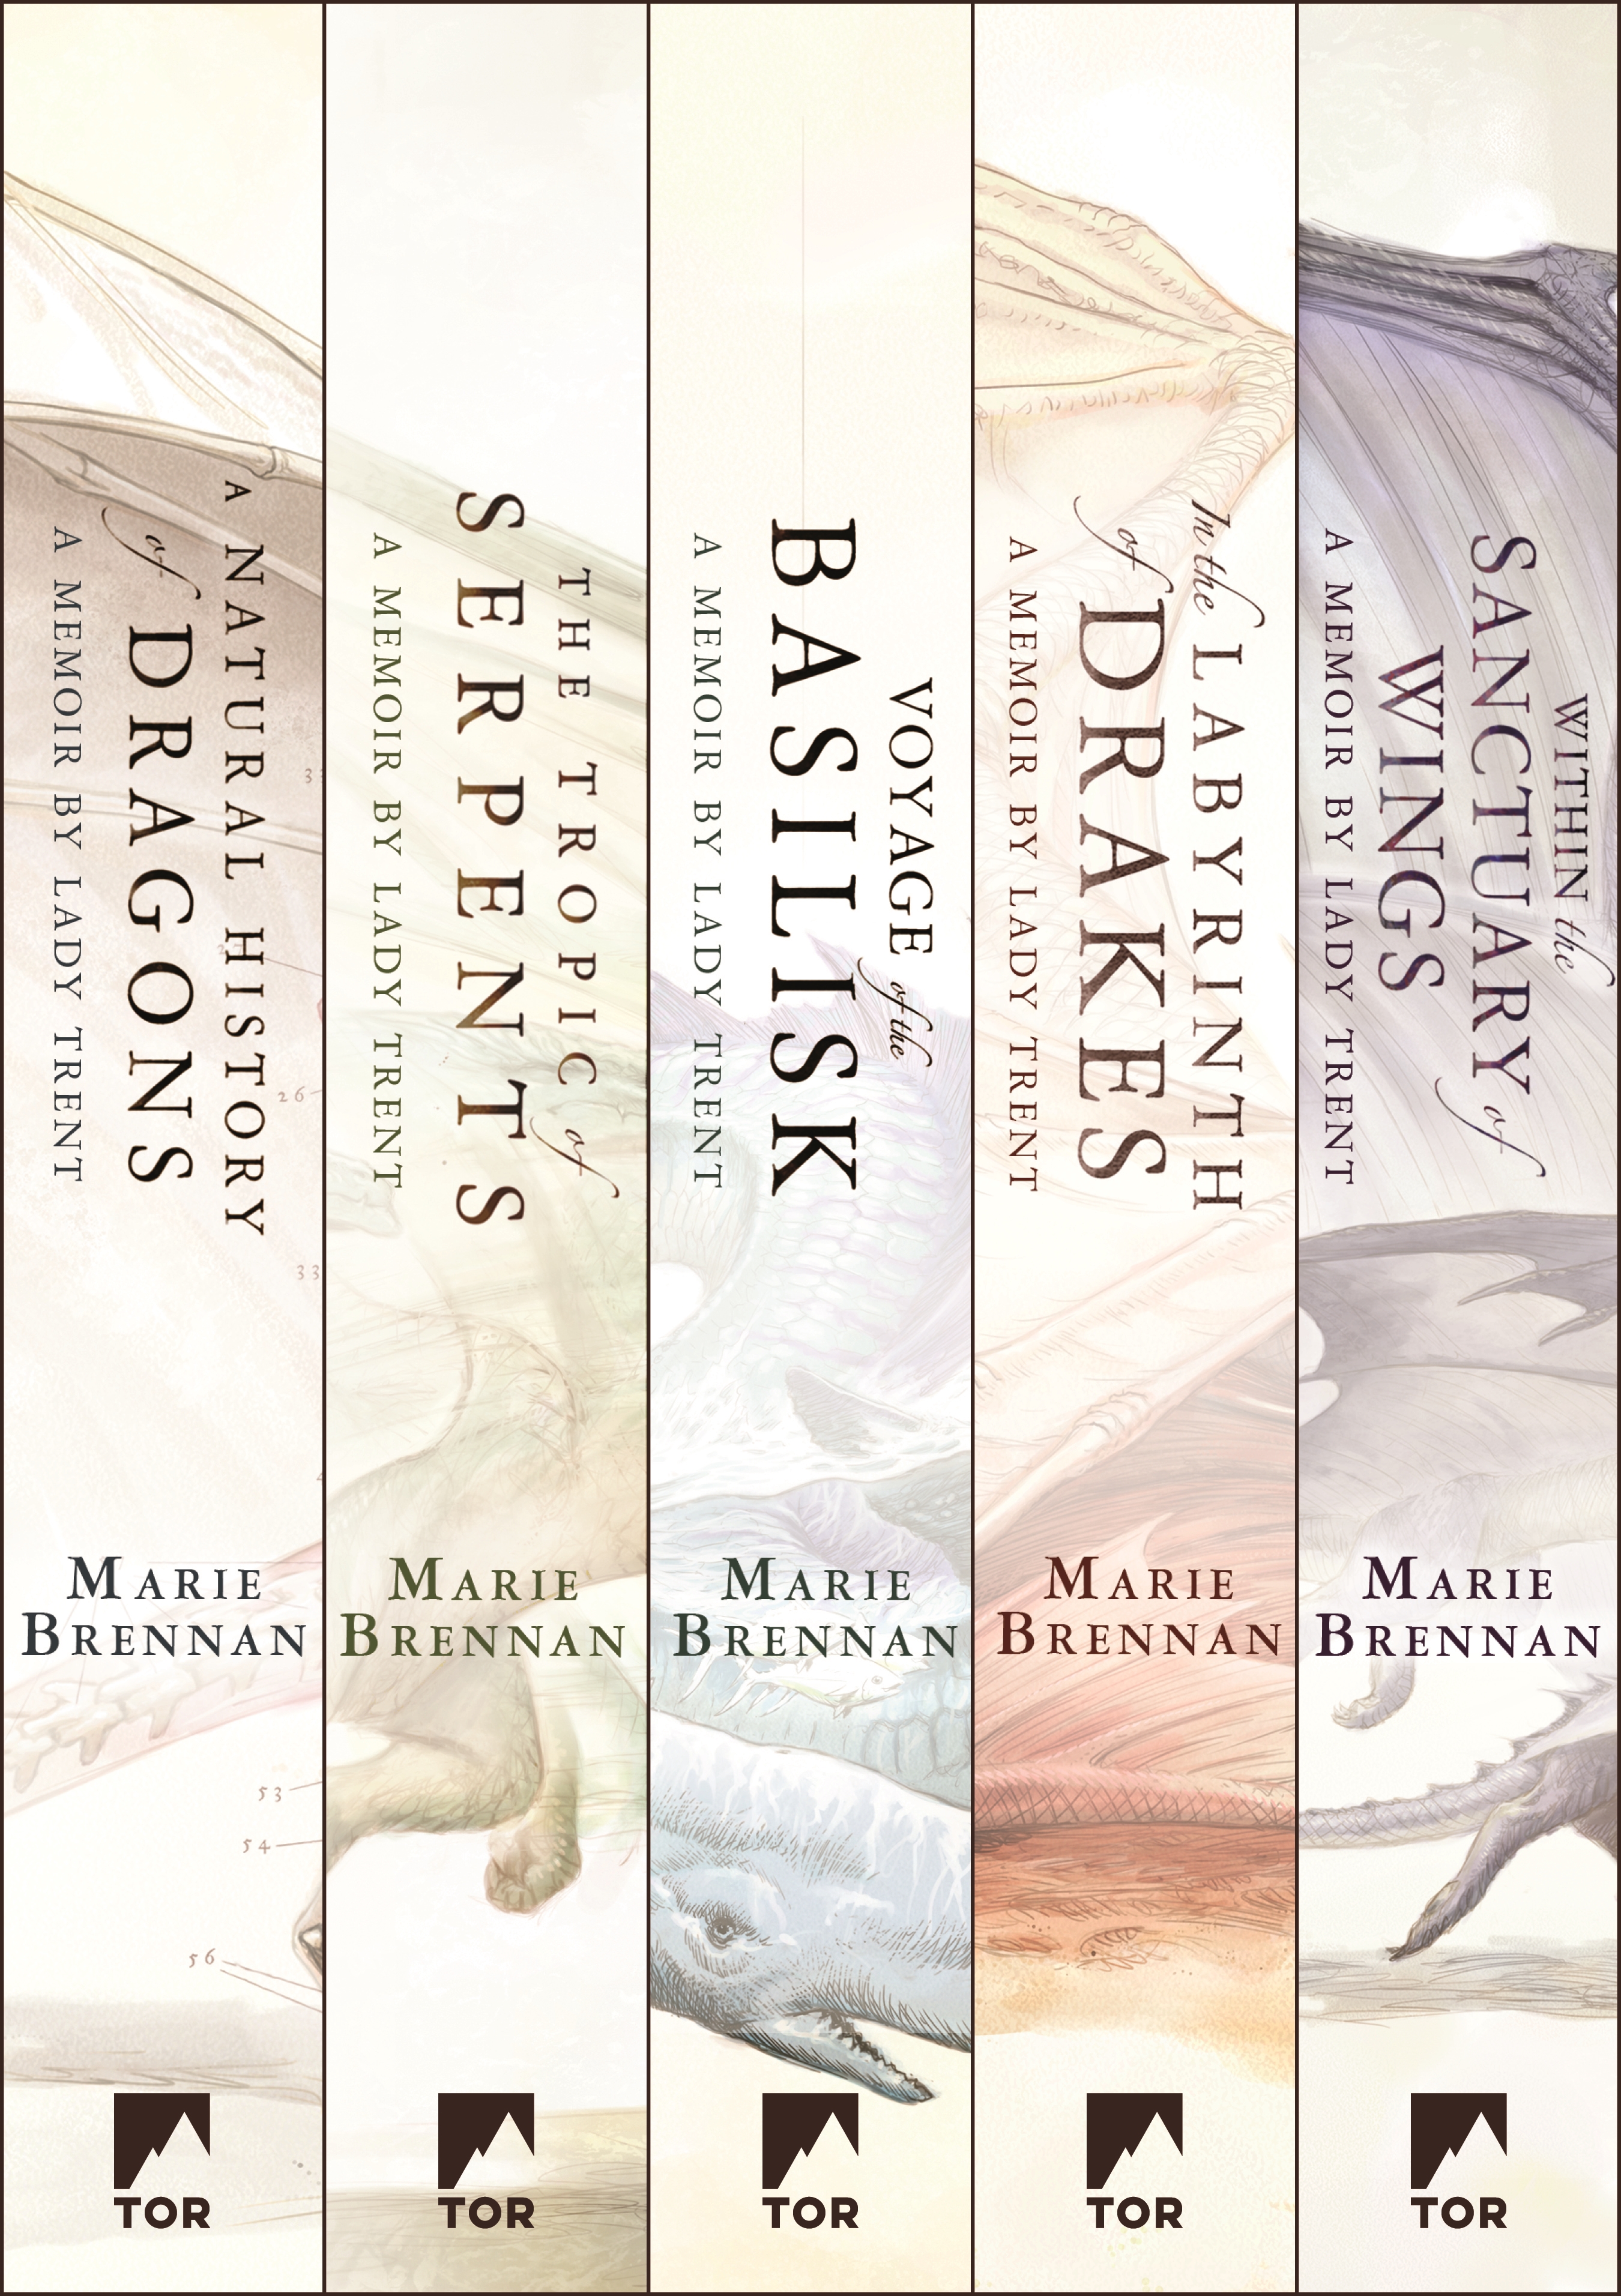 The Complete Memoirs of Lady Trent Series : A Natural History of Dragons, The Tropic of Serpents, The Voyage of the Basilisk, In the Labyrinth of Drakes, Within the Sanctuary of Wings by Marie Brennan